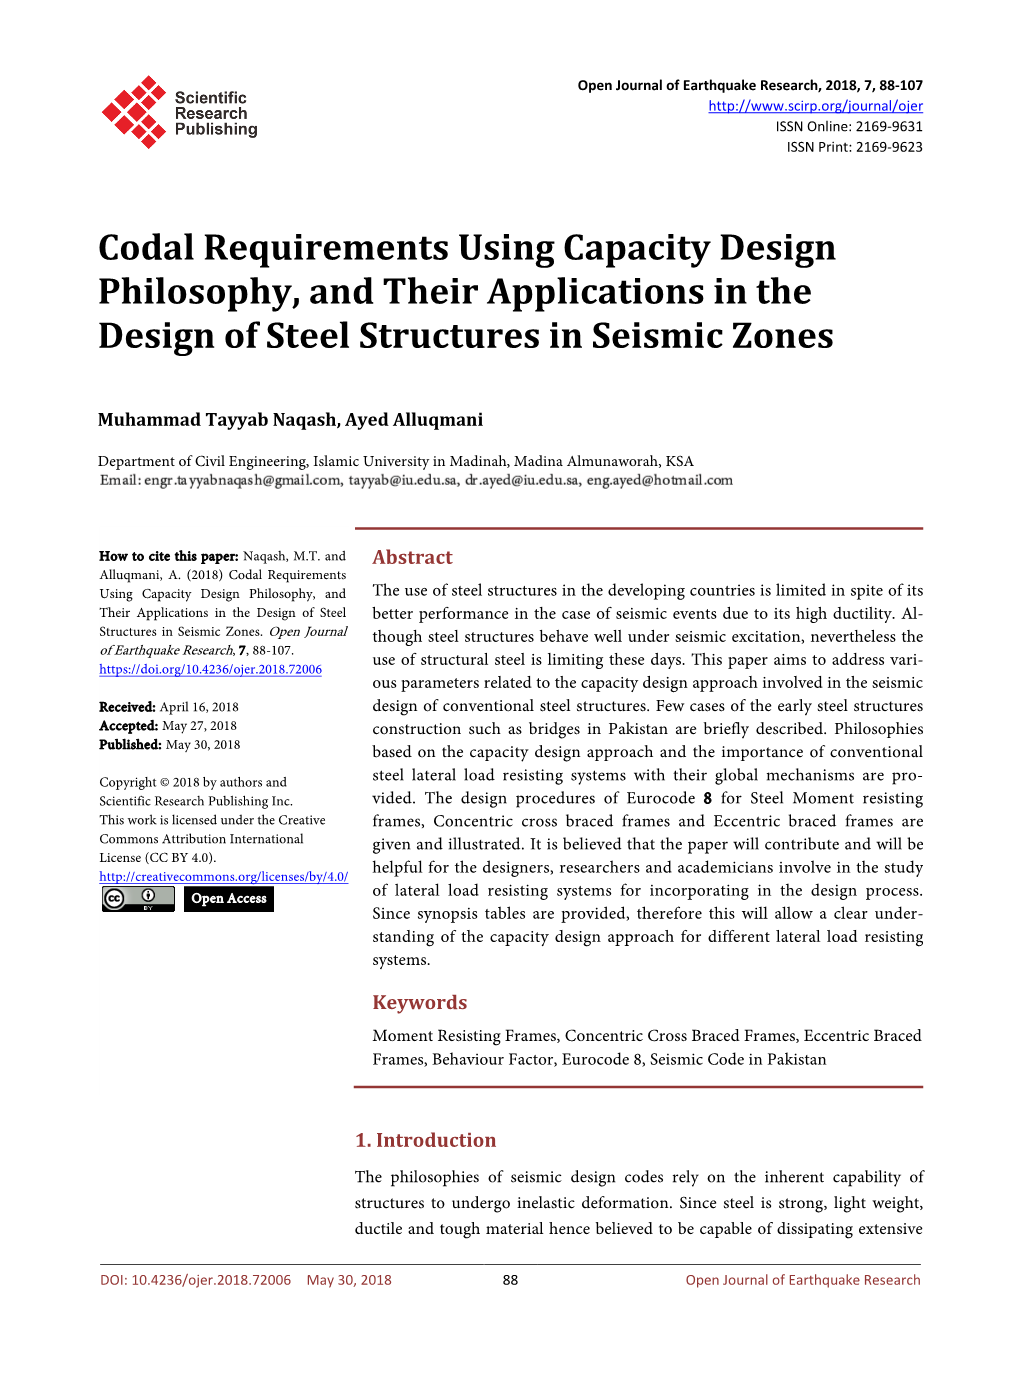 Codal Requirements Using Capacity Design Philosophy, and Their Applications in the Design of Steel Structures in Seismic Zones